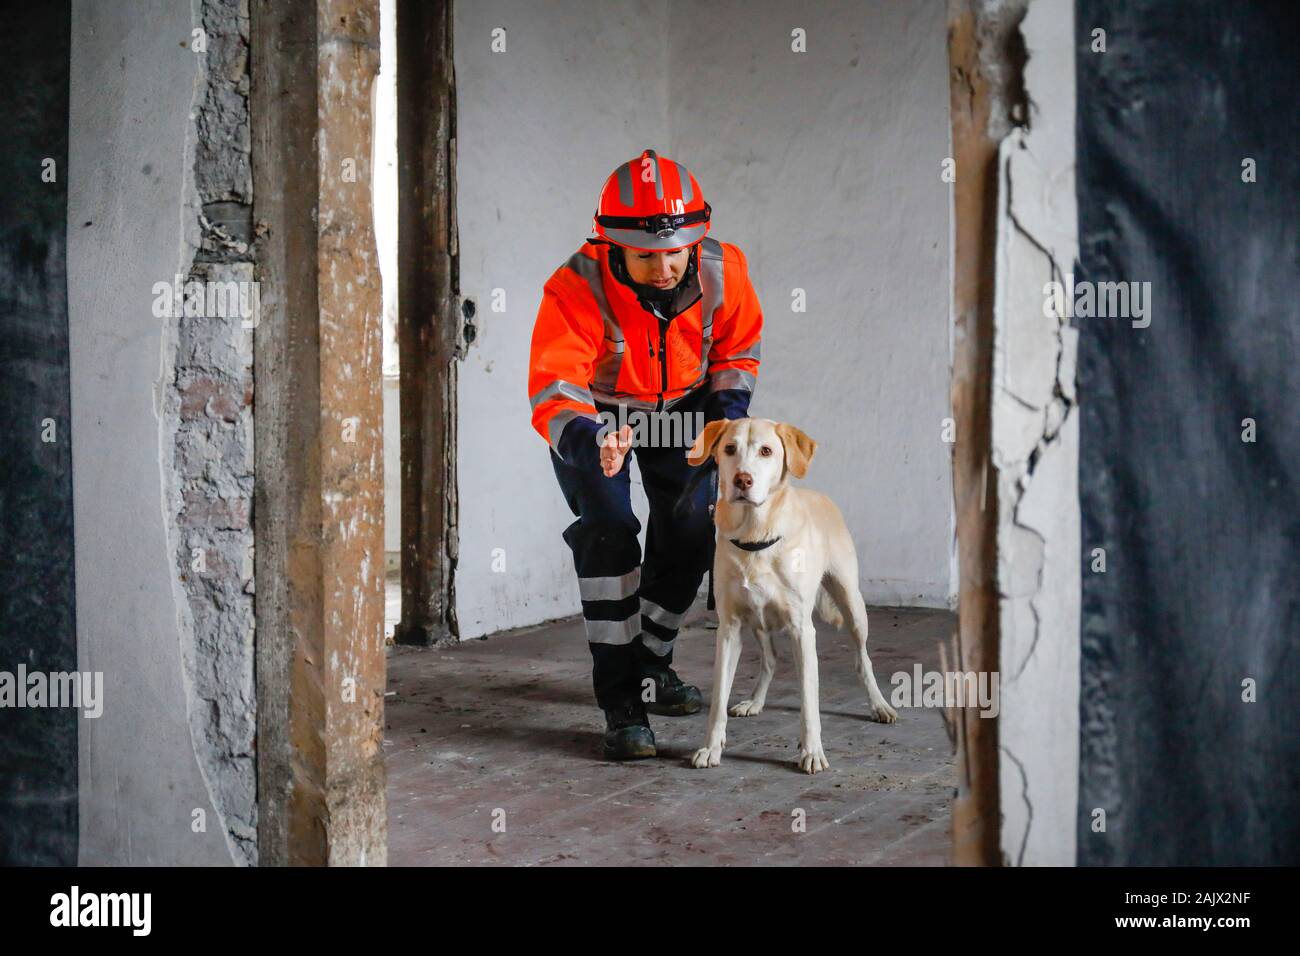 Herne, North Rhine-Westphalia, Germany - Rescue dog training, in empty houses the tracker dogs practice the search for injured, buried people e.g. aft Stock Photo